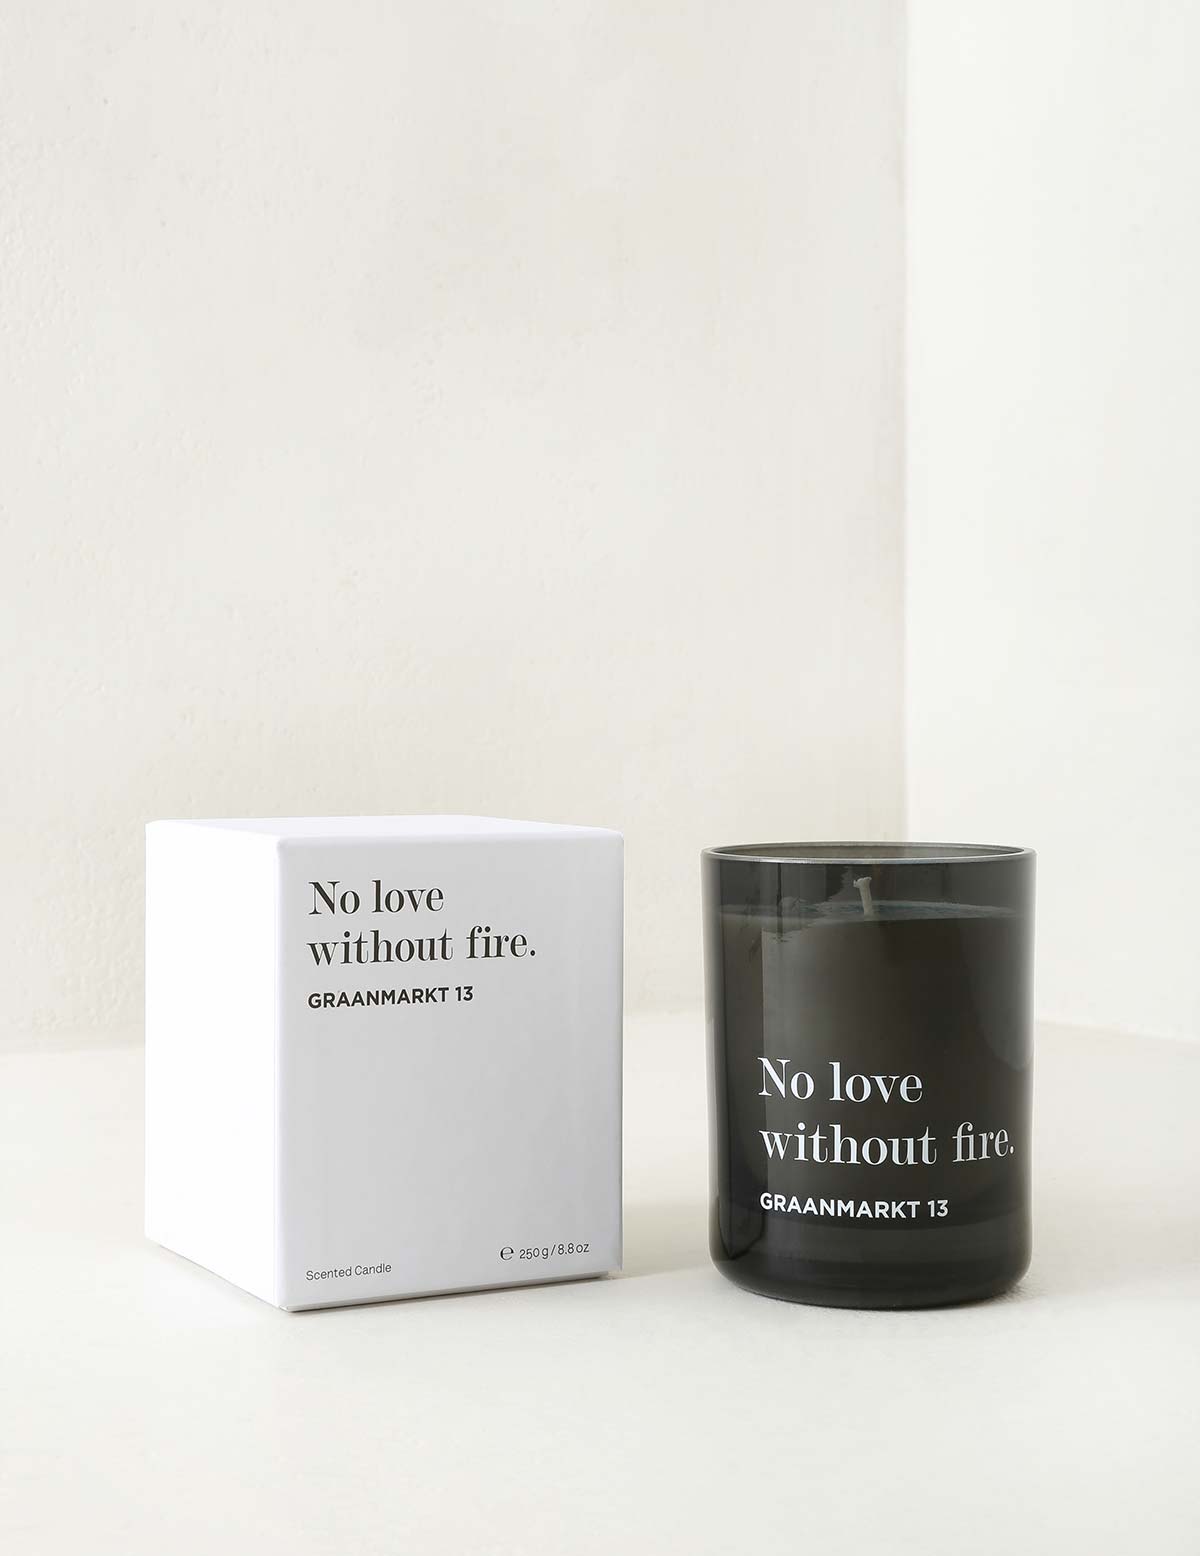 No love without fire scented candle